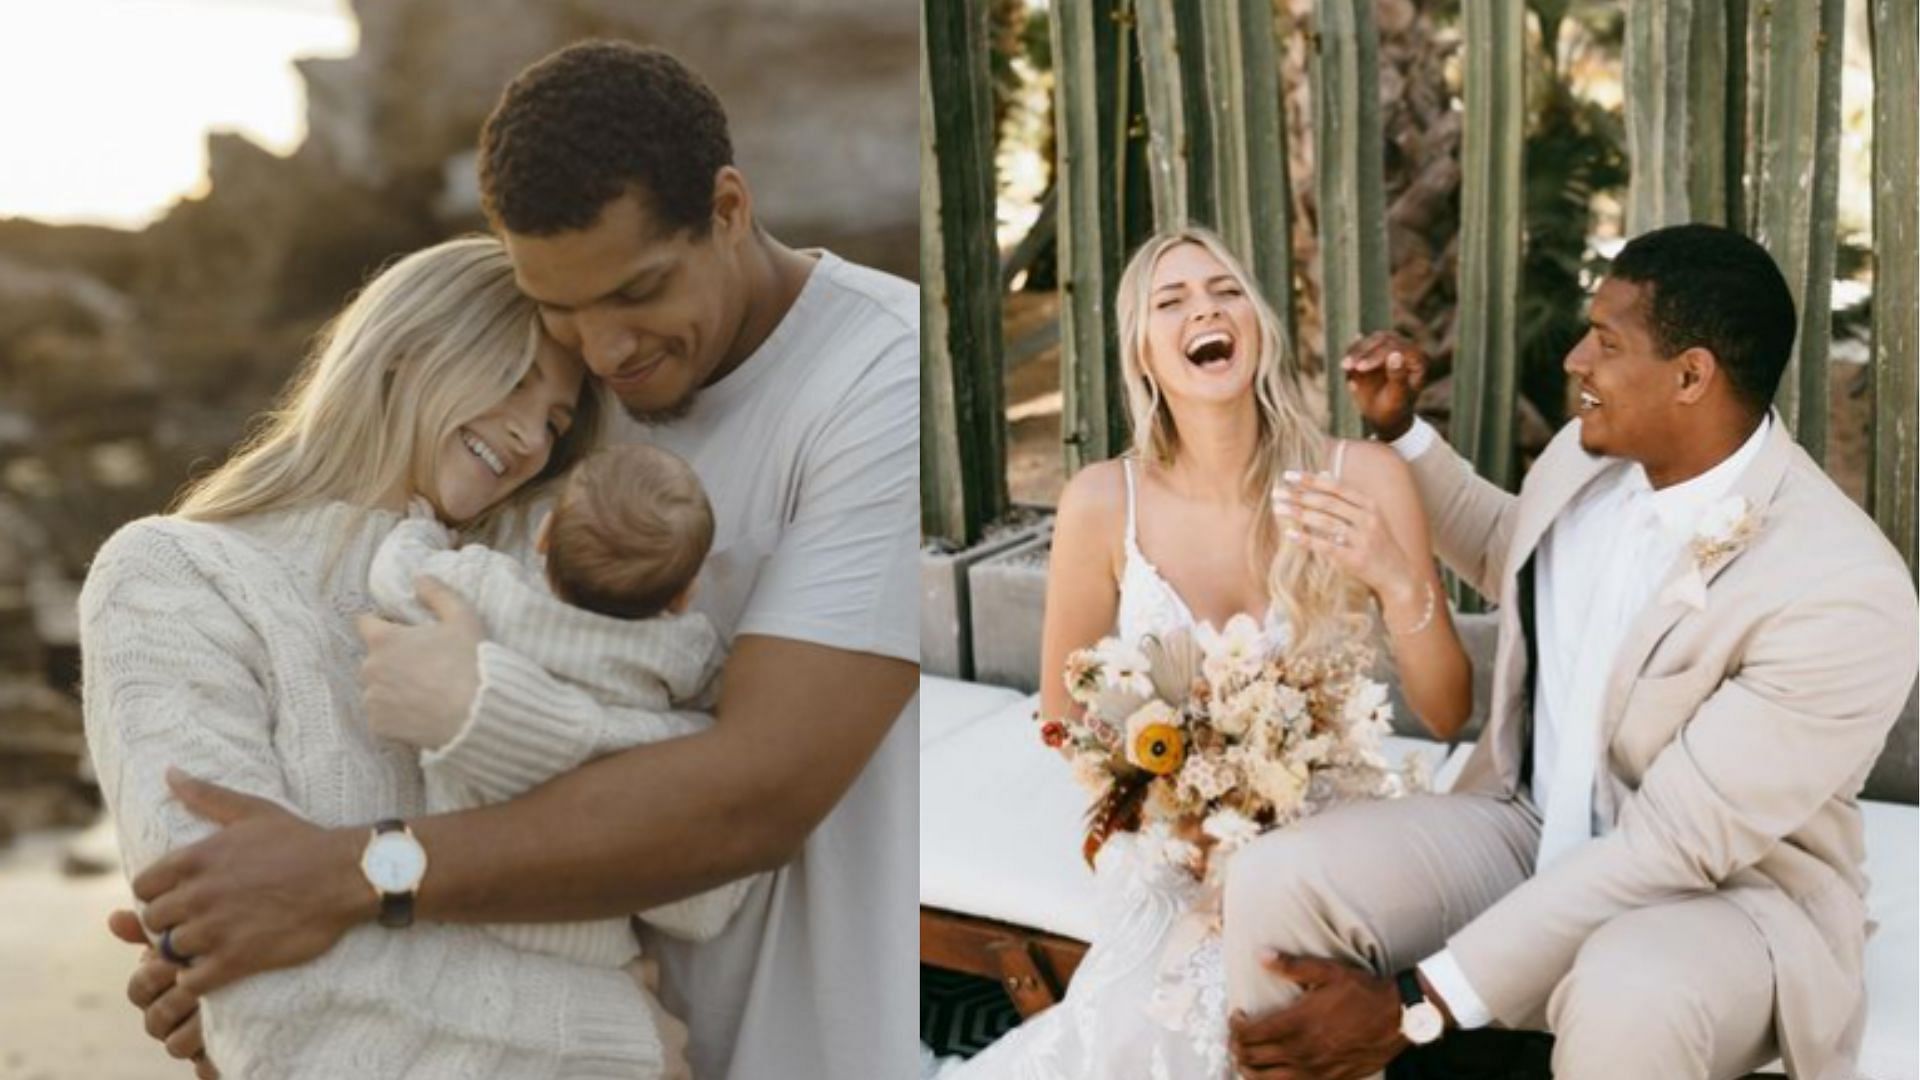 Allison Kuch and Isaac Rochell celebrated their third wedding anniversary.